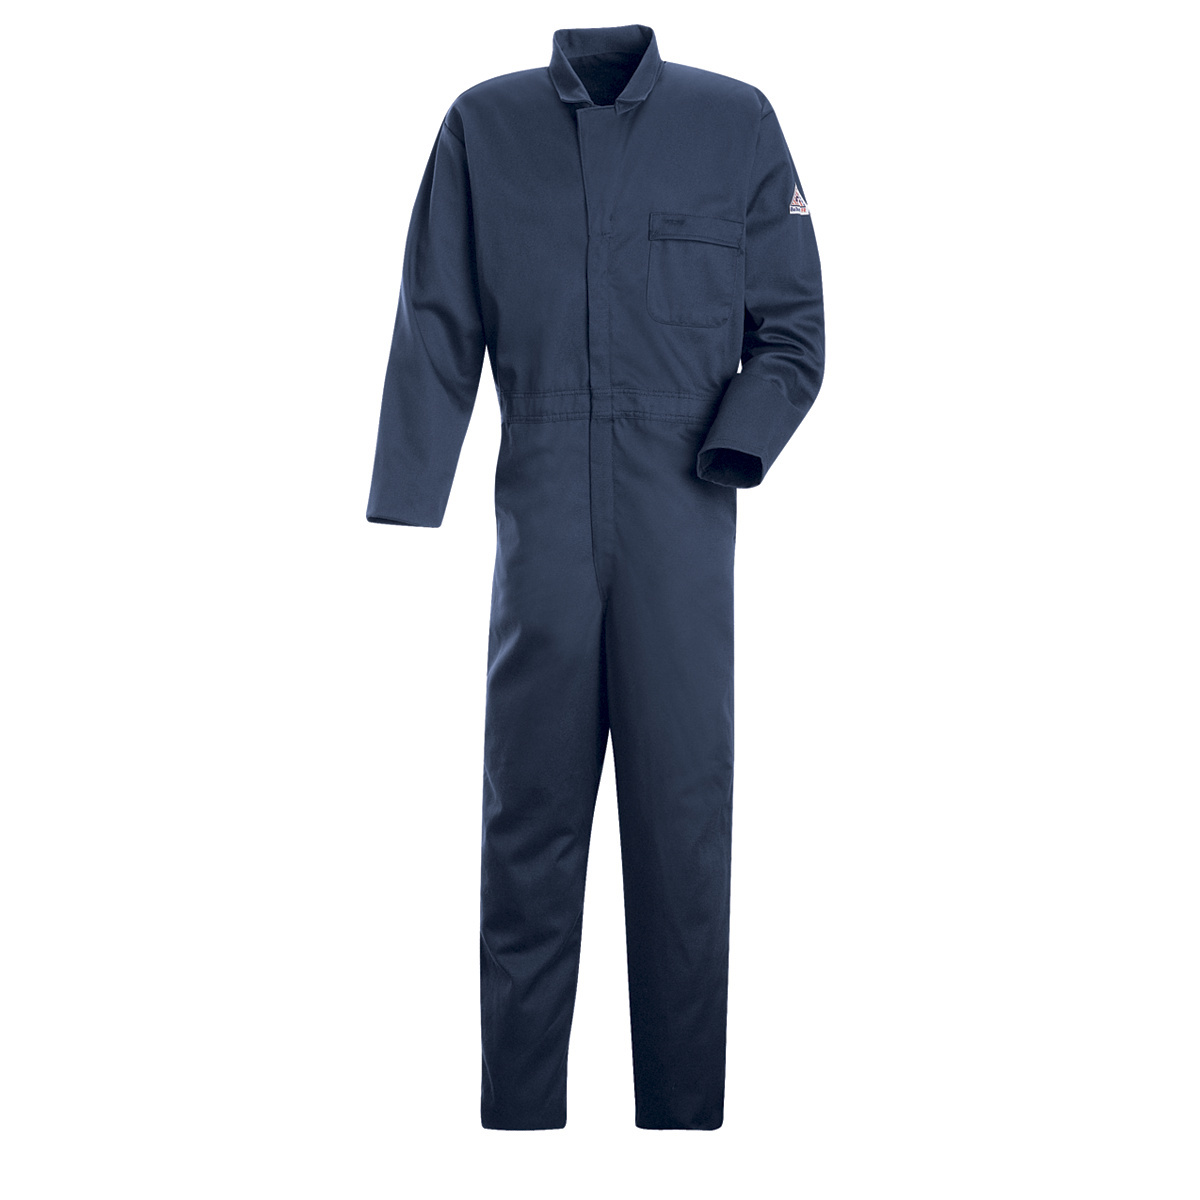 Bulwark® 6X Regular Navy Blue EXCEL FR® Twill Cotton Flame Resistant Coveralls With Zipper Front Closure